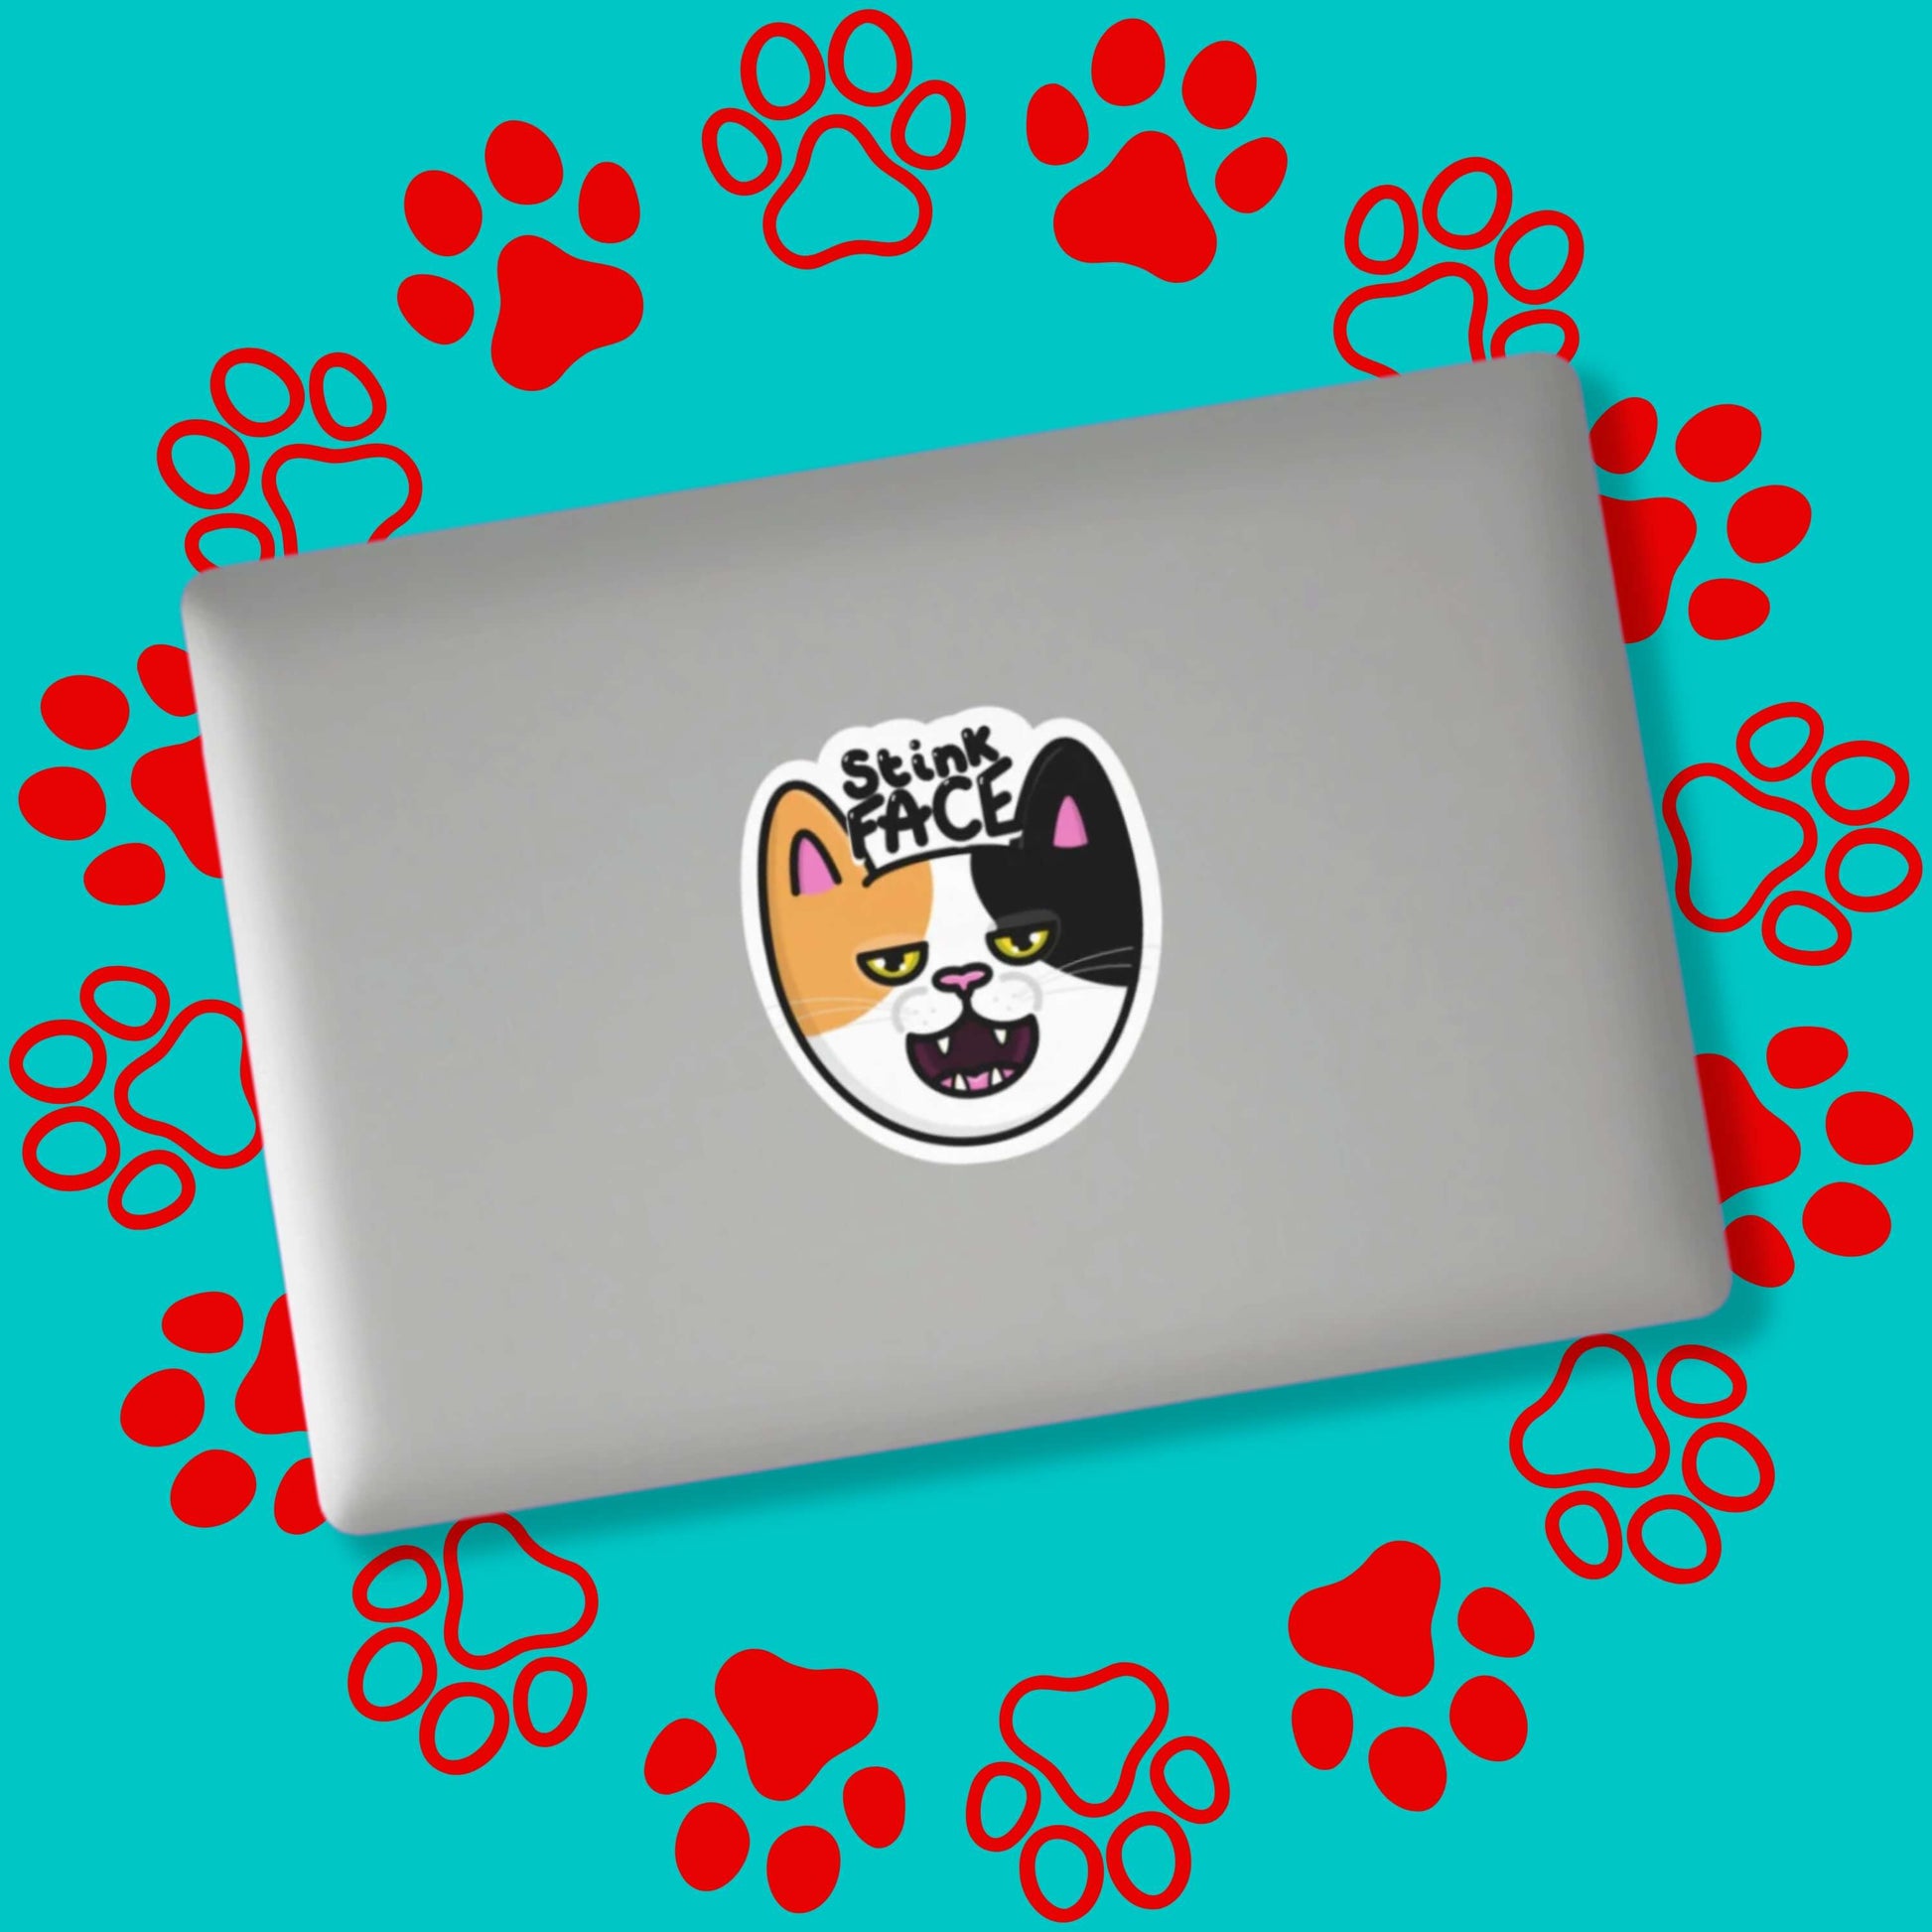 The Stink Face Cat Sticker stuck on a silver laptop on a red and blue paw print background. The orange and black cat head sticker is smiling with a smug look on its face and black text above reading 'stink face'.